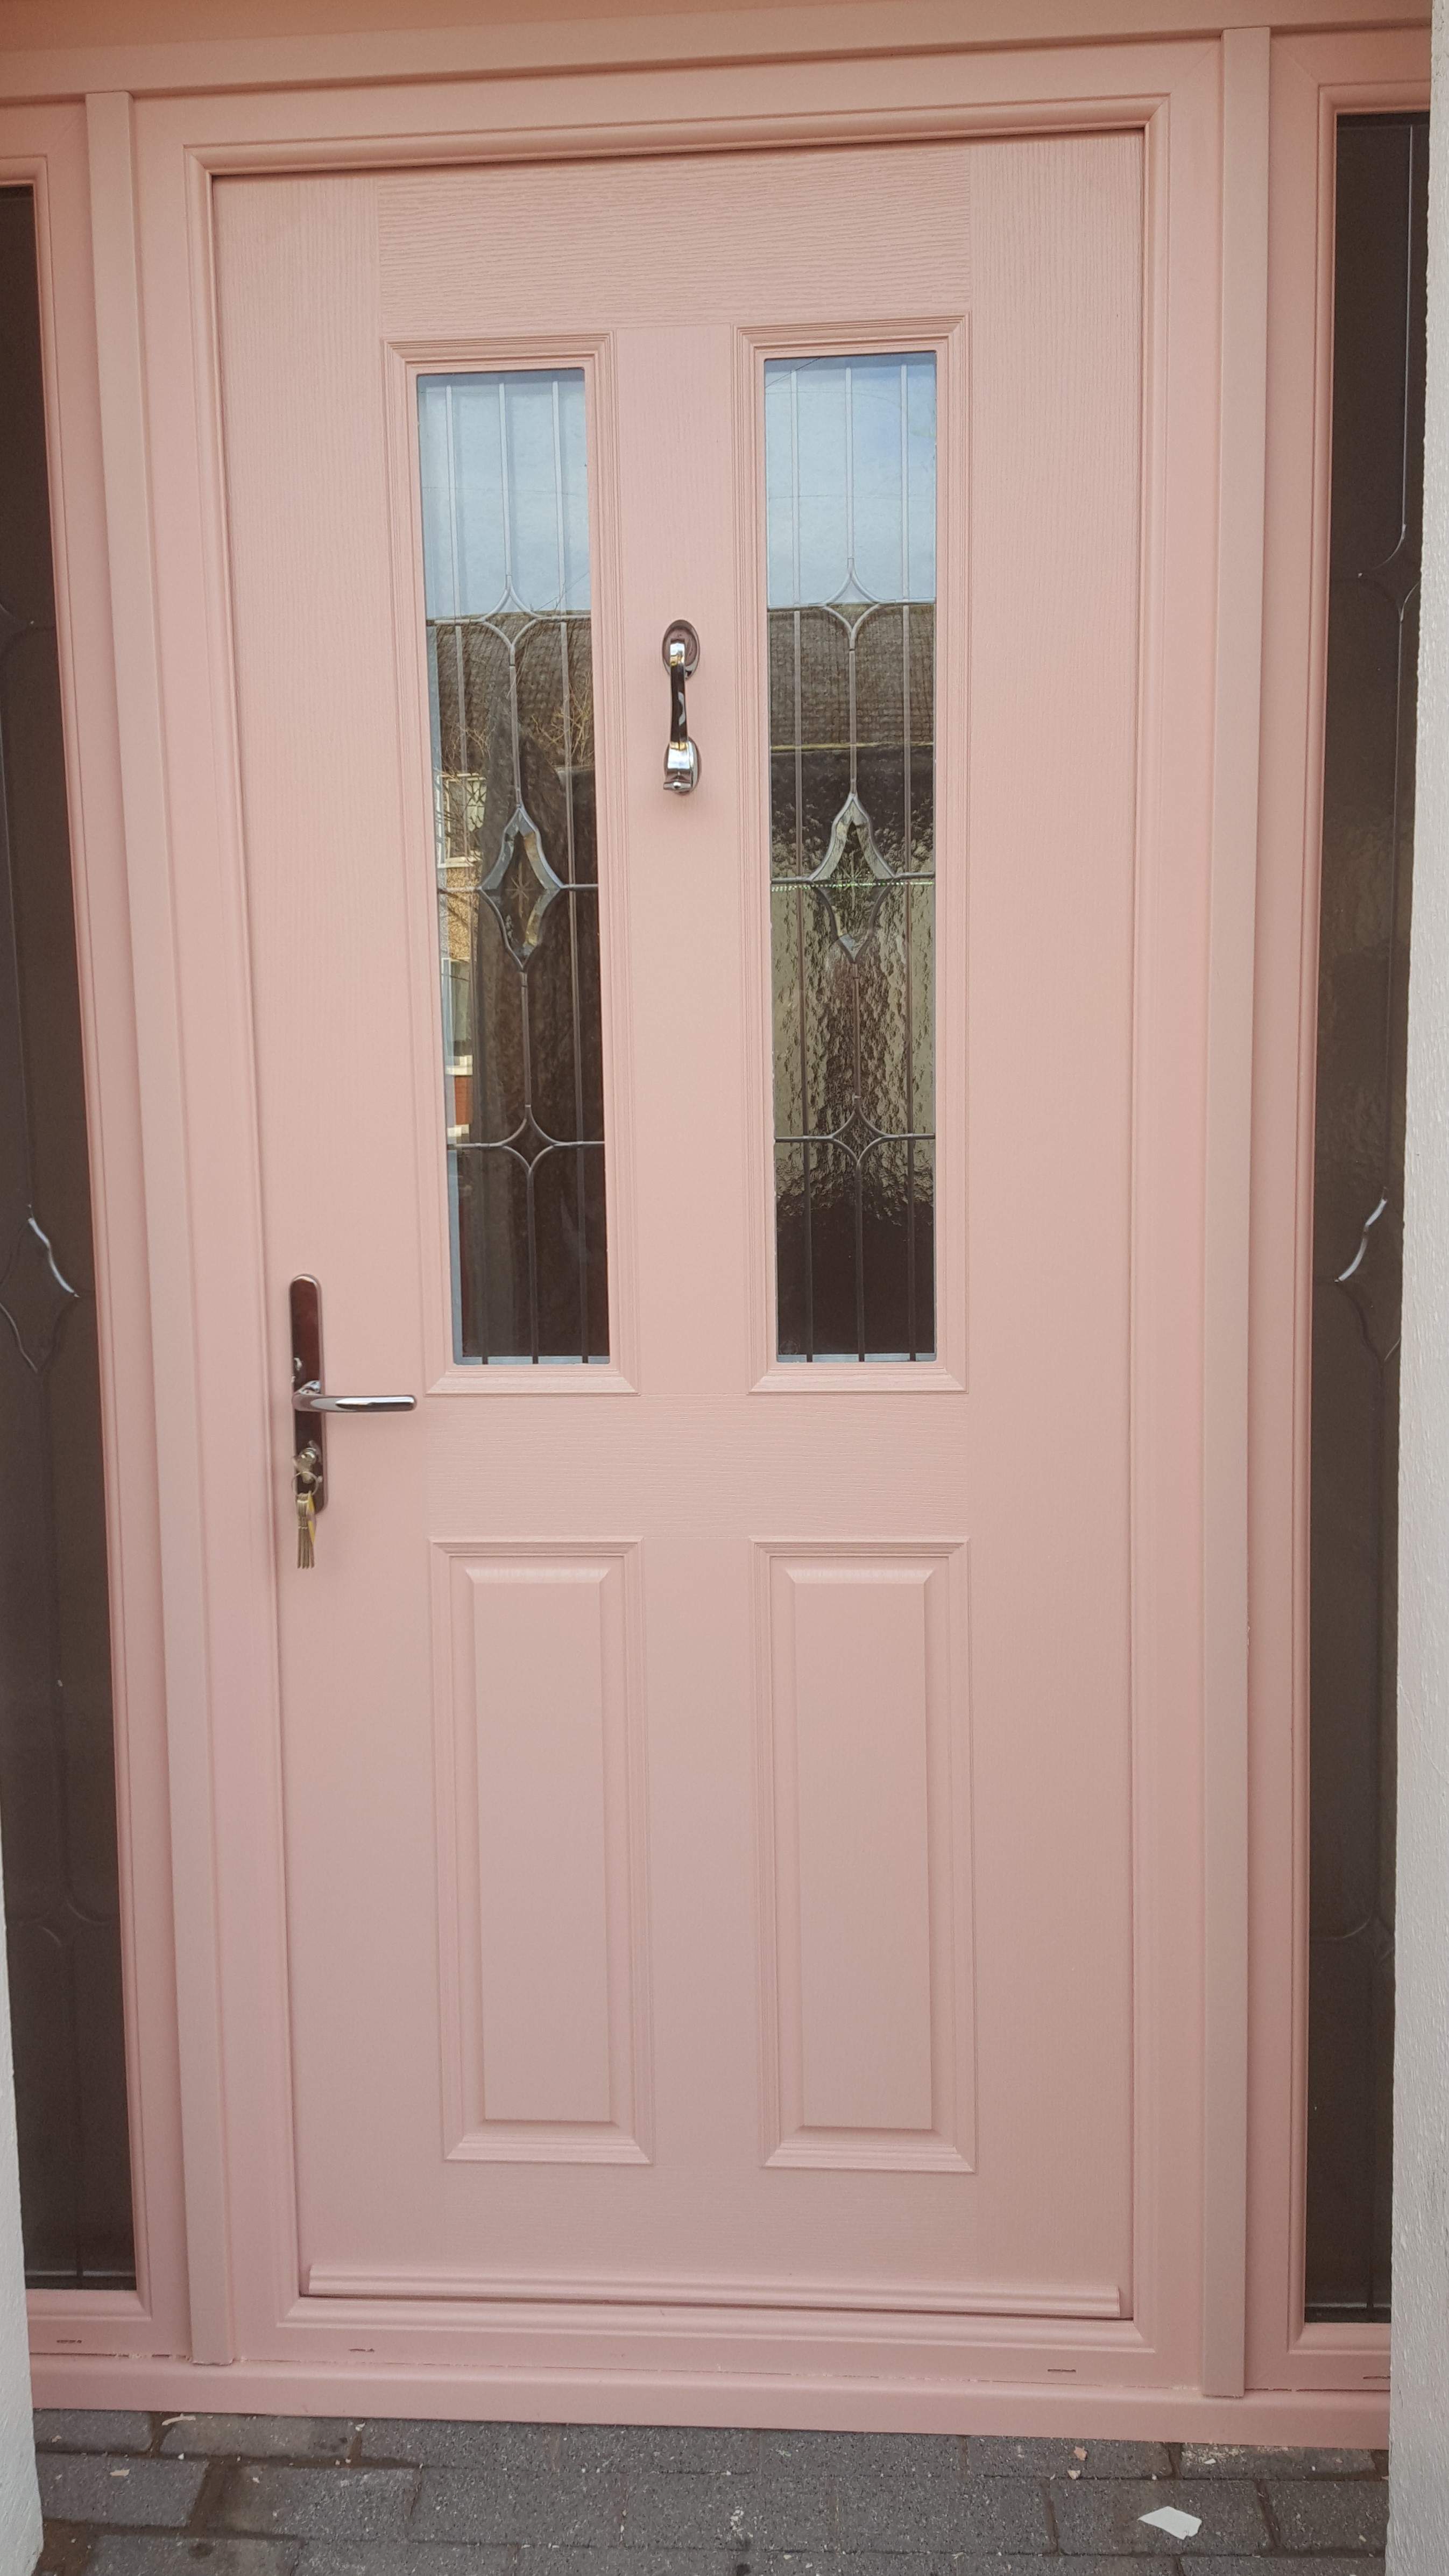 ORCHID PINK APEER APM2 COMPOSITE FRONT DOOR FITTED BY ASGARD WINDOWS IN DUBLIN 9.